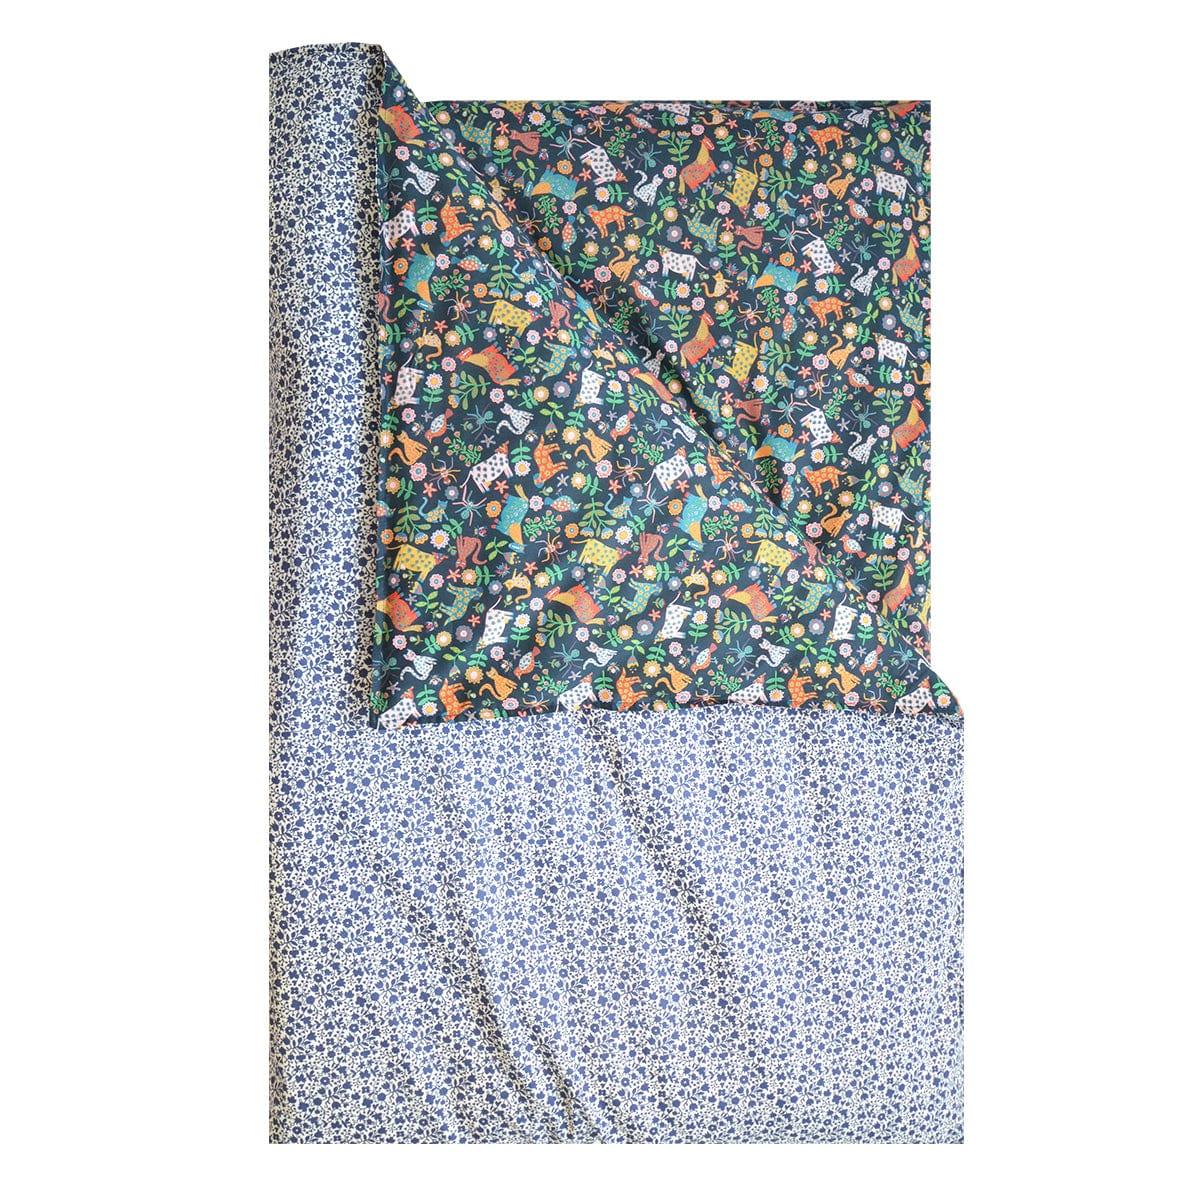 Bedding made with Liberty Fabric FOLK TAILS & FLORAL STENCIL - Coco & Wolf